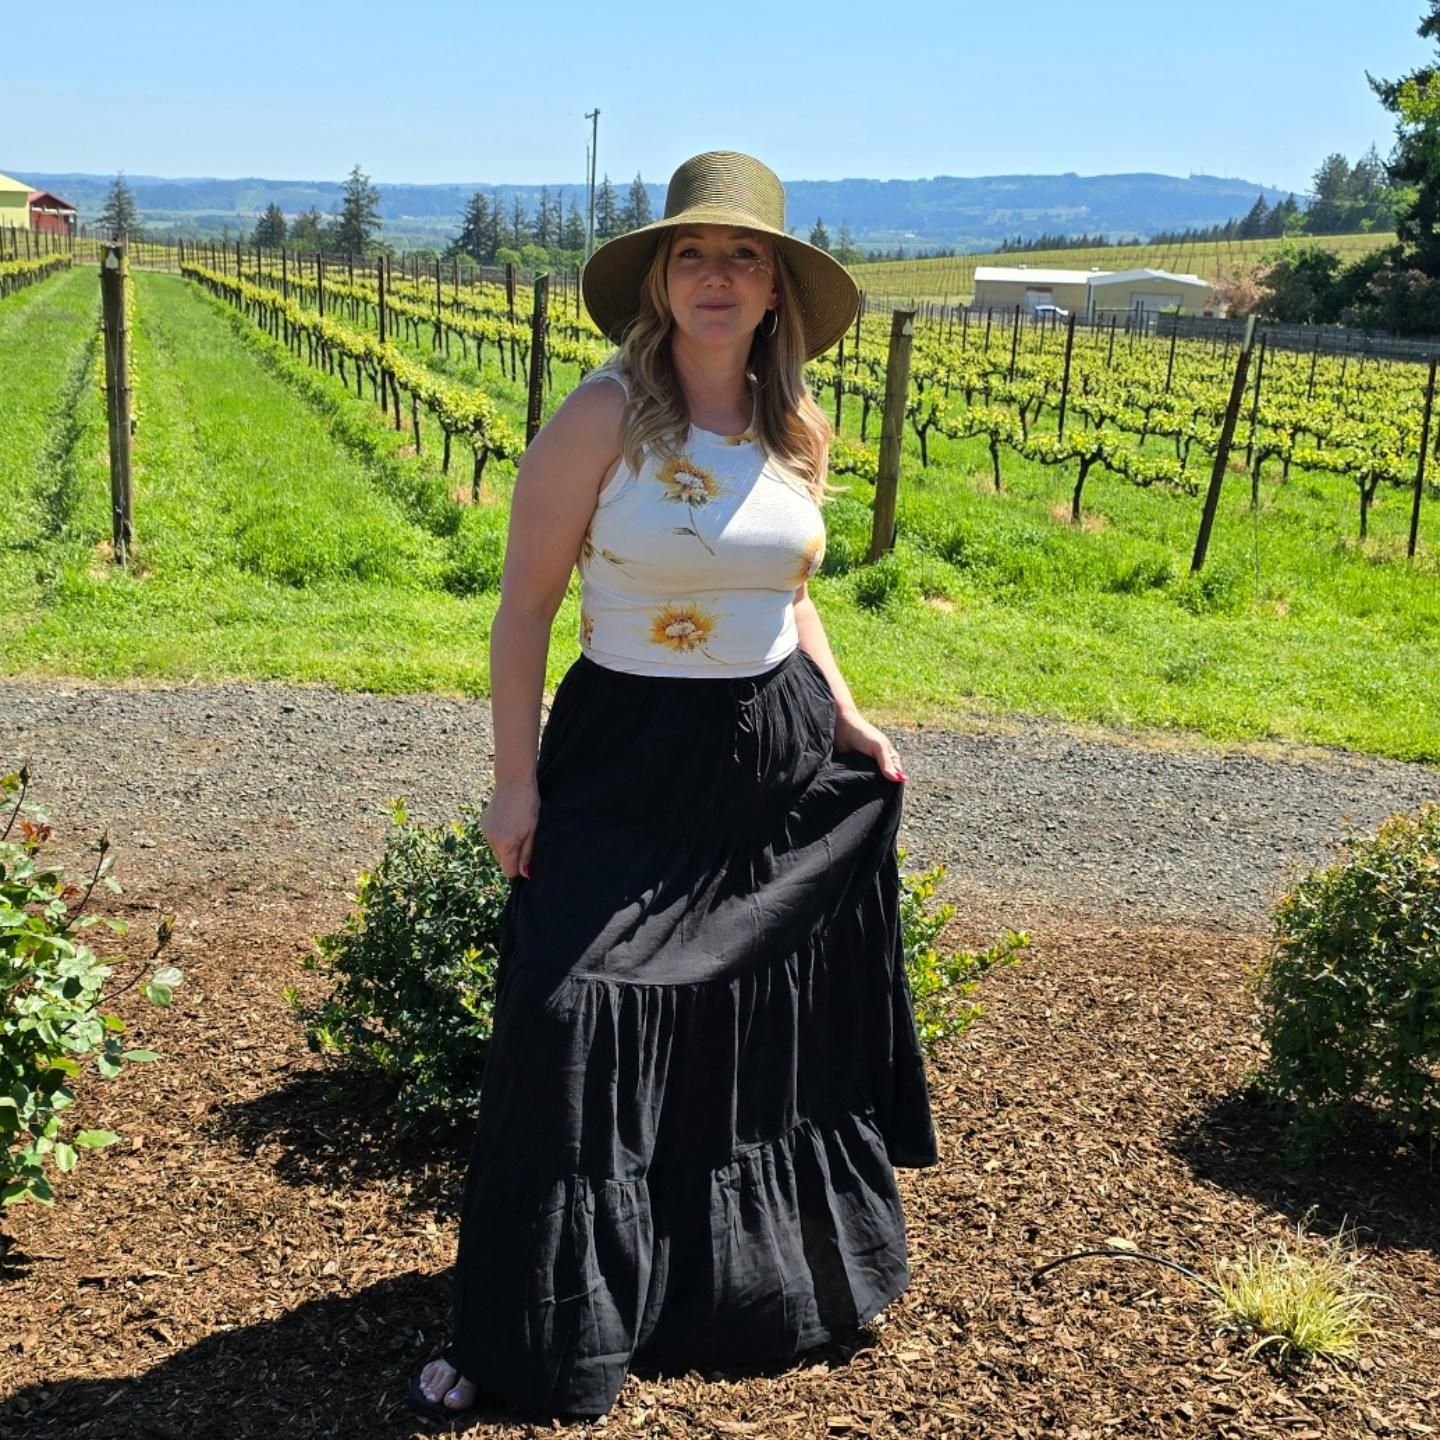 Have a great weekend ❤️ 
#outfitoftheday #momstyle #sunny #winetasting #winery